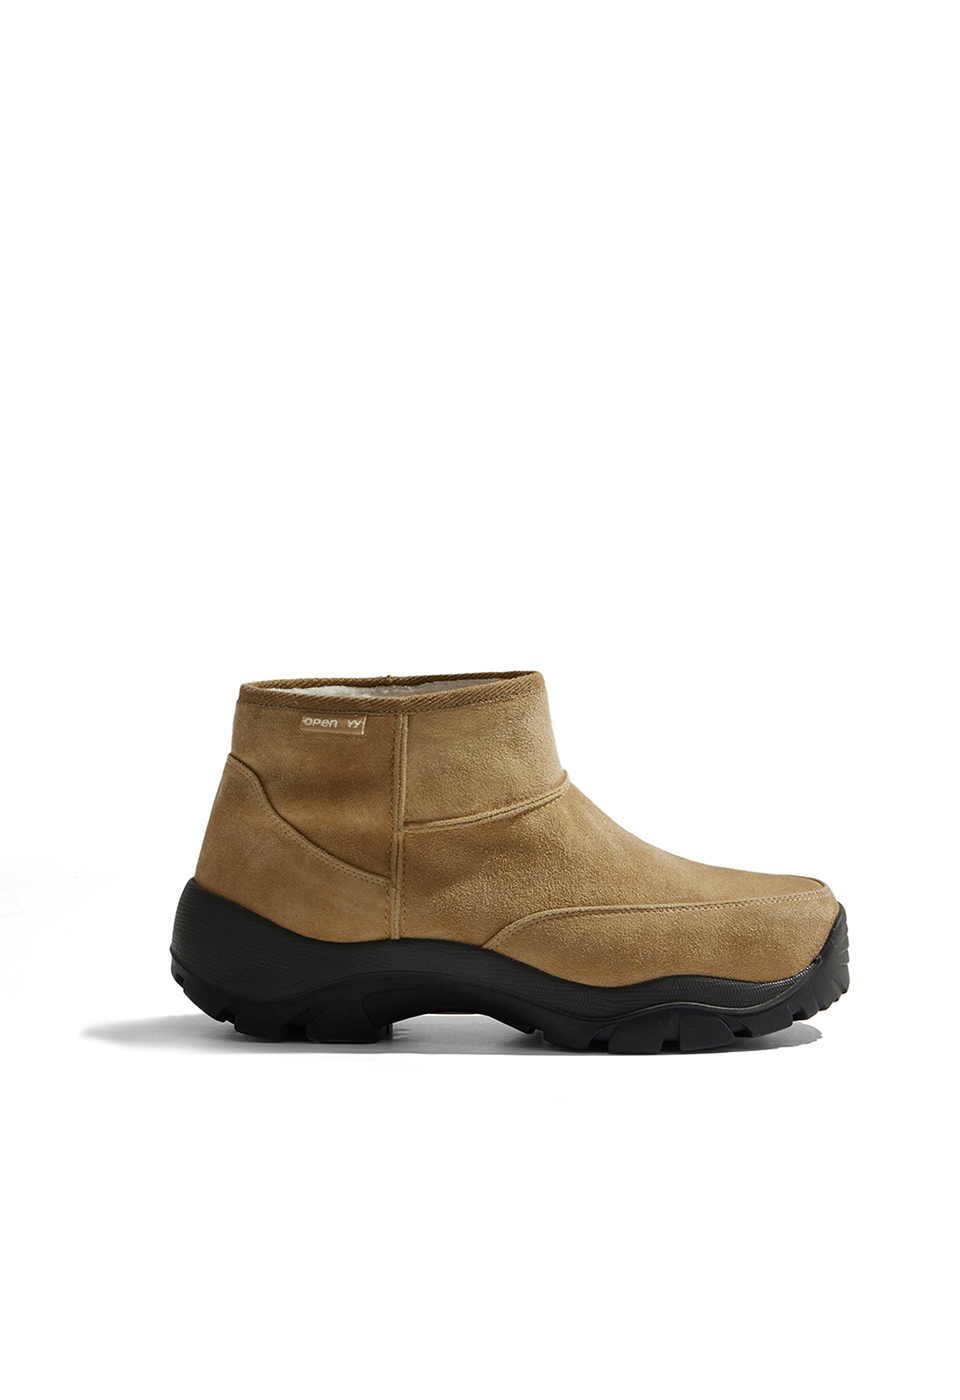 SUEDE MOUNTAIN ANKLE BOOTS, BEIGE